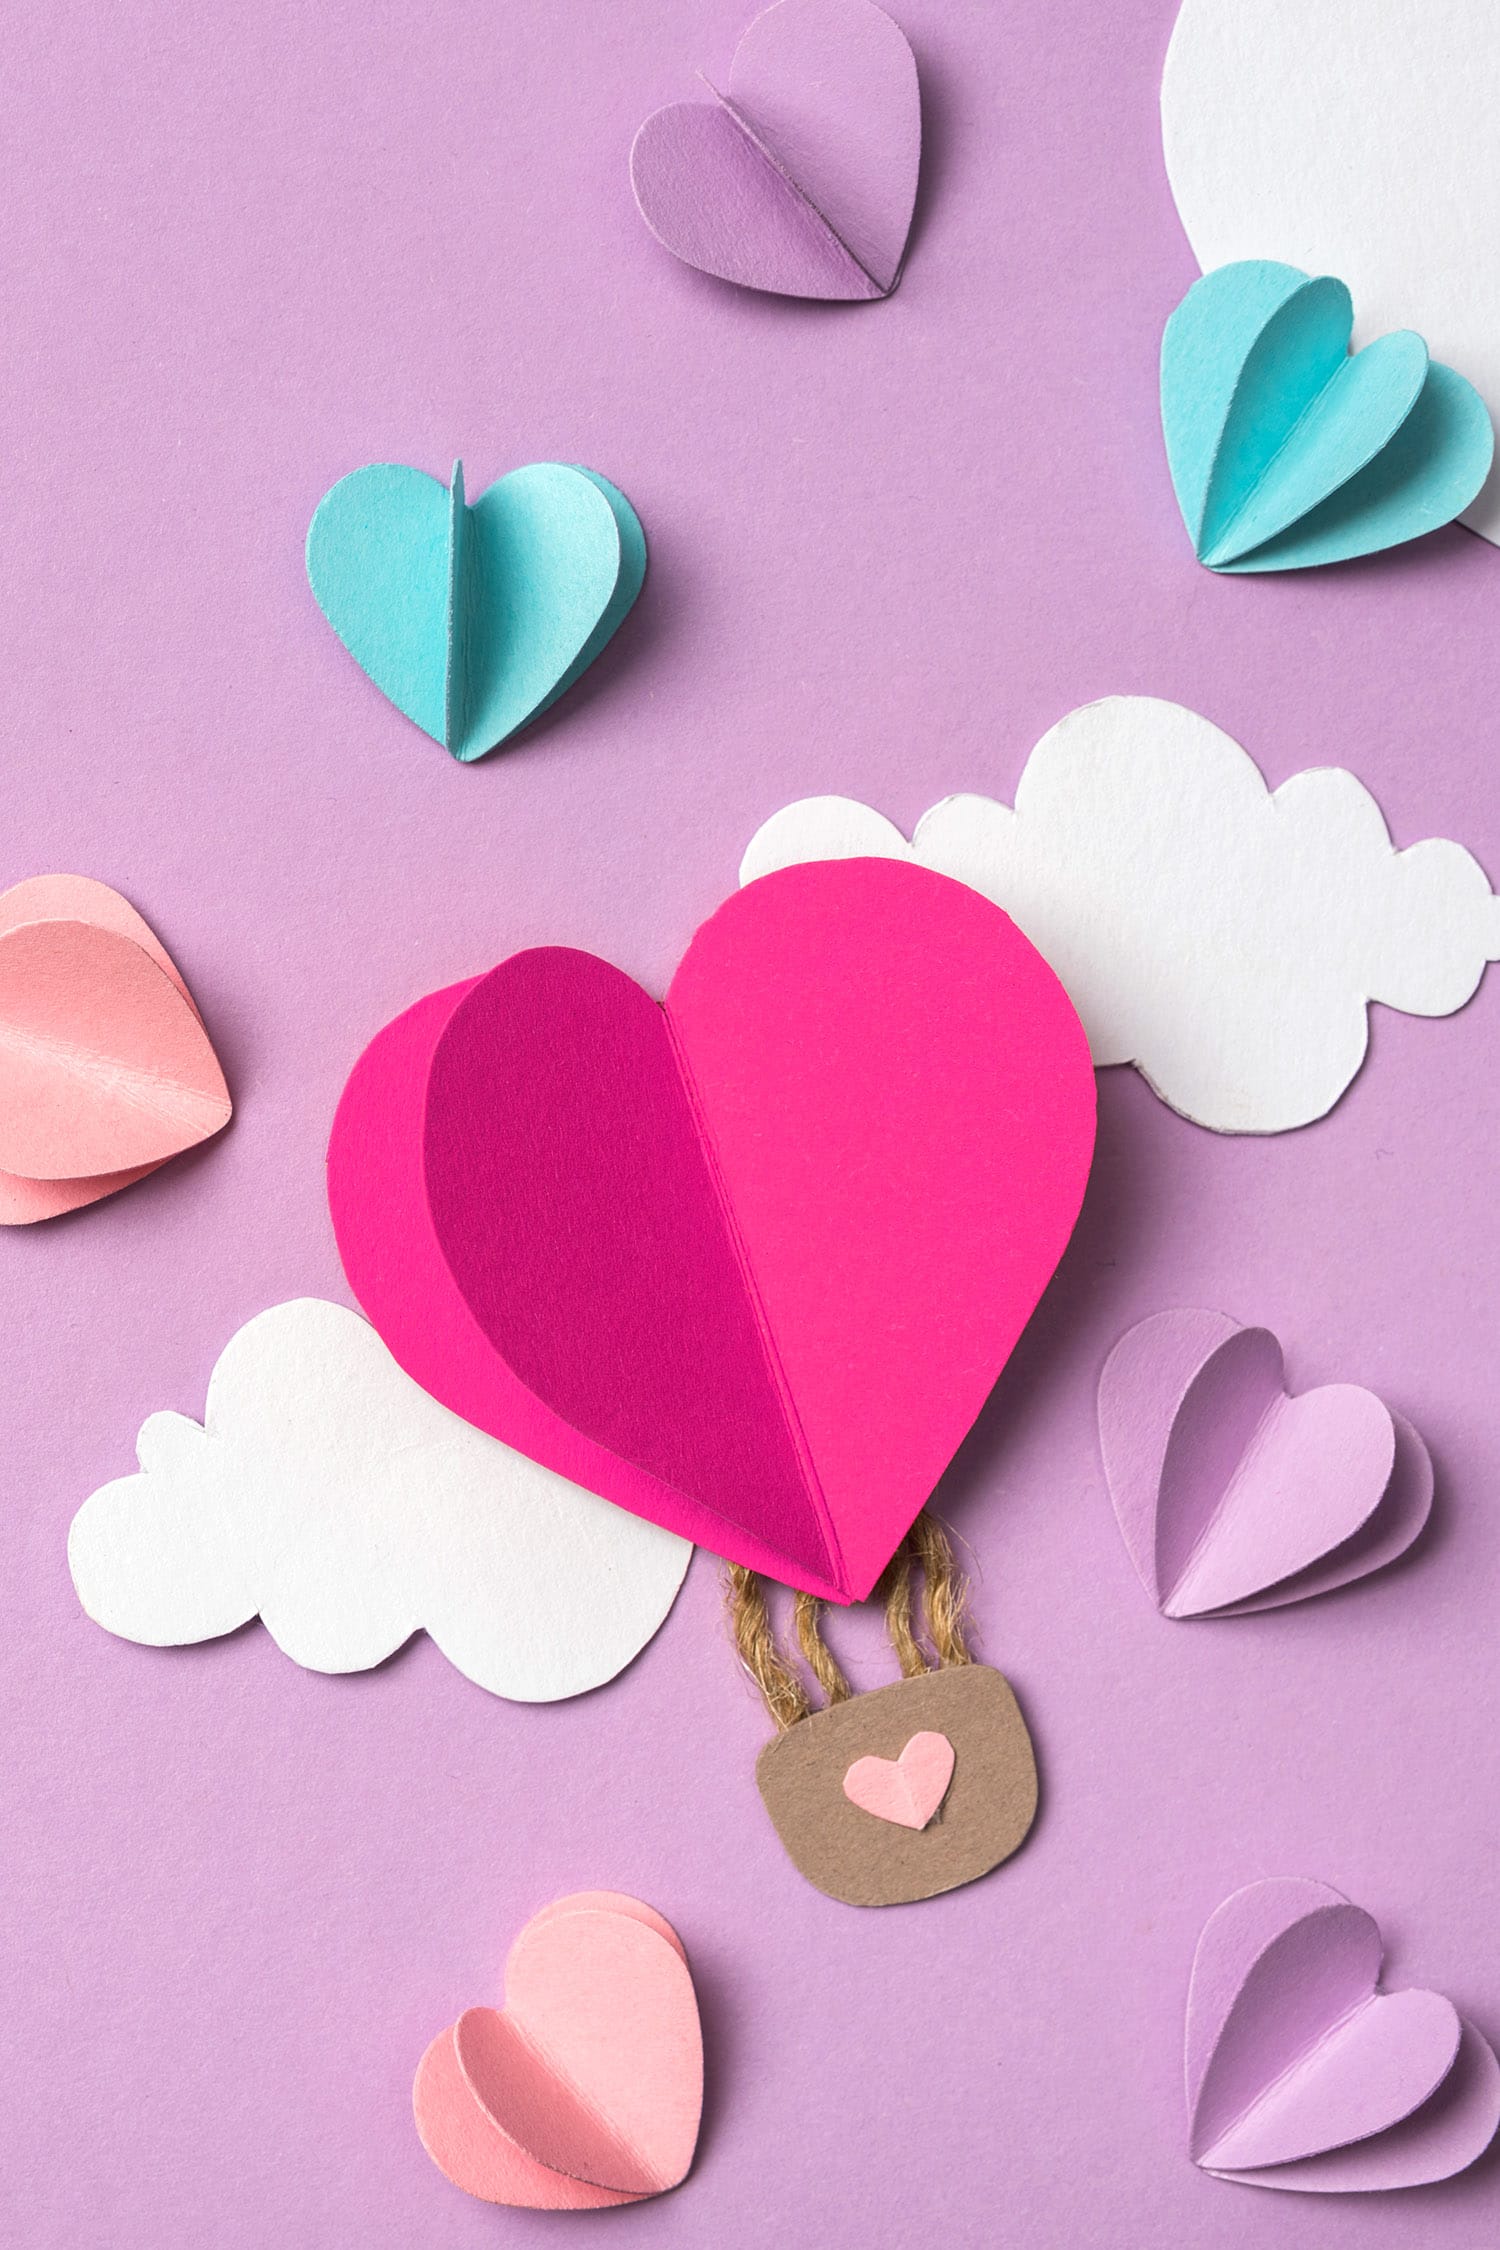 colorful paper hearts and clouds around heart shaped paper hot air balloon on purple background